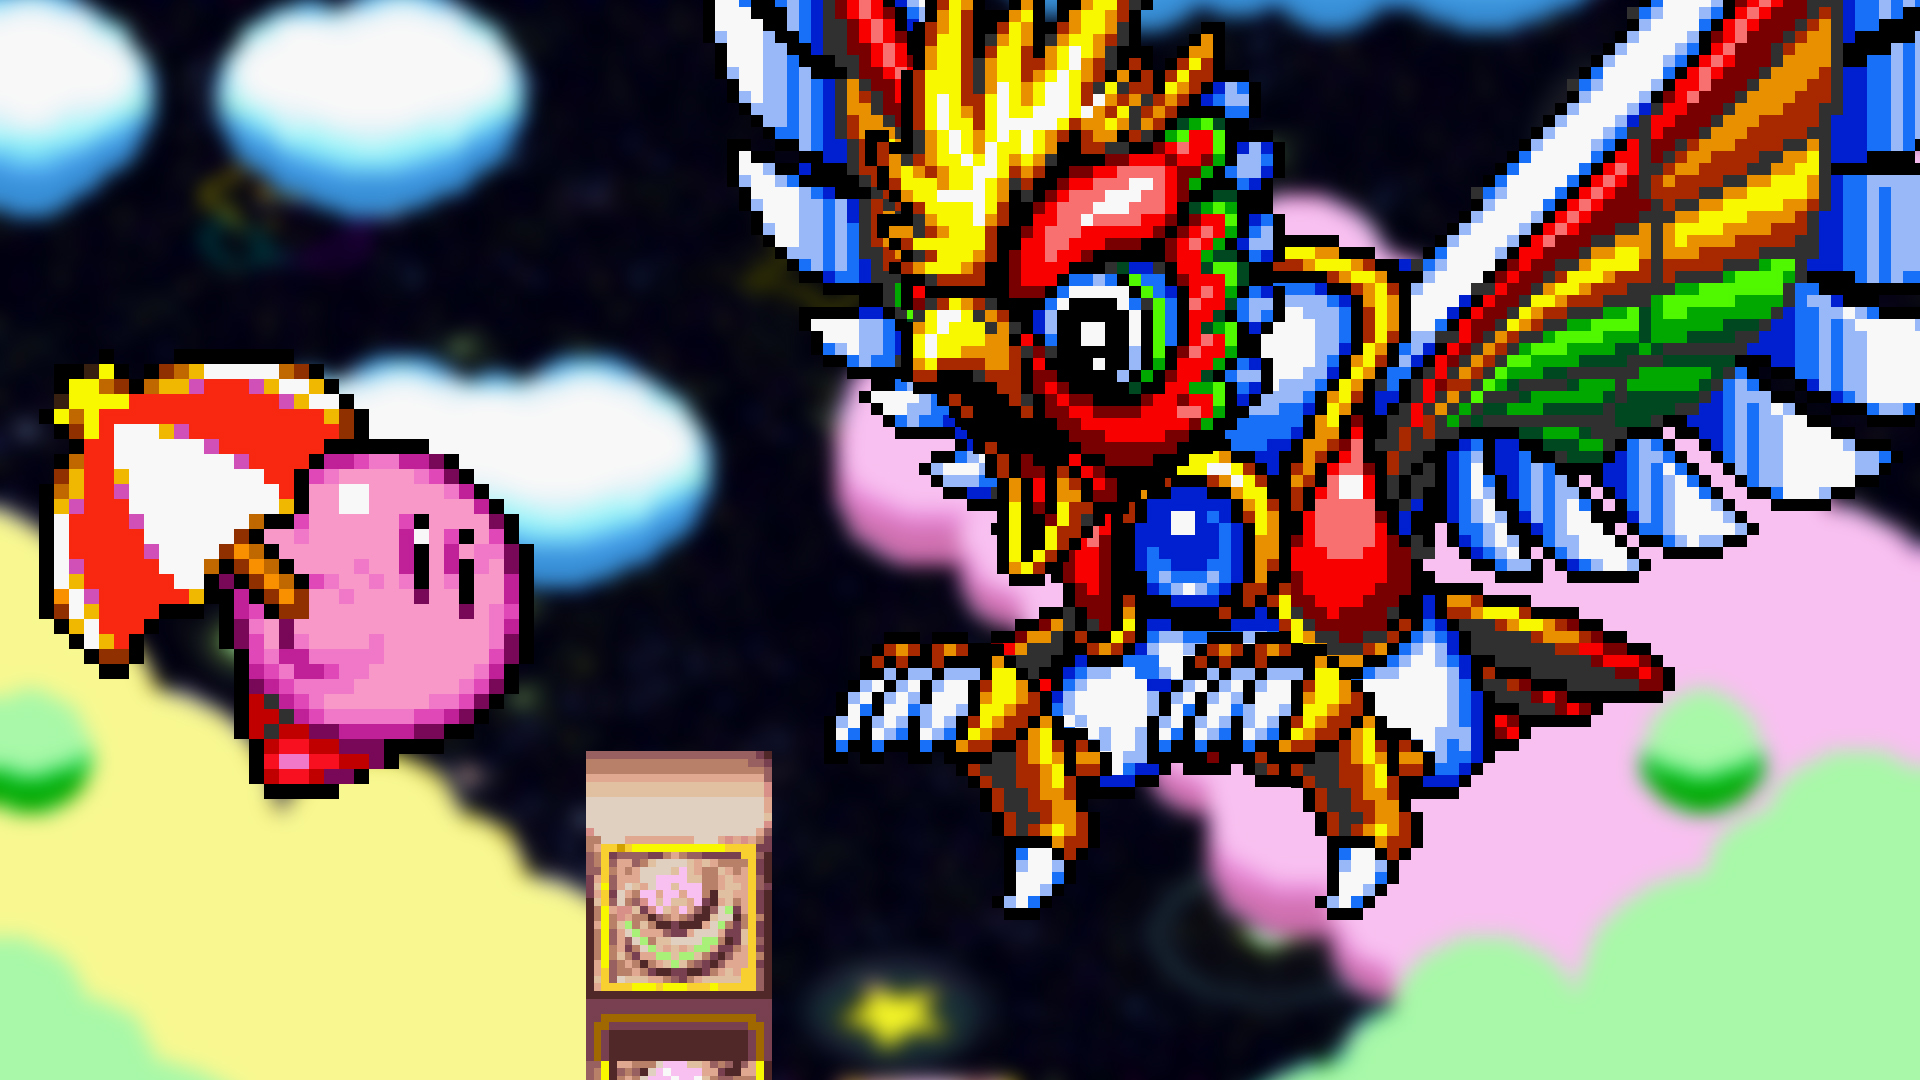 Kirby Super Star Ultra Picture